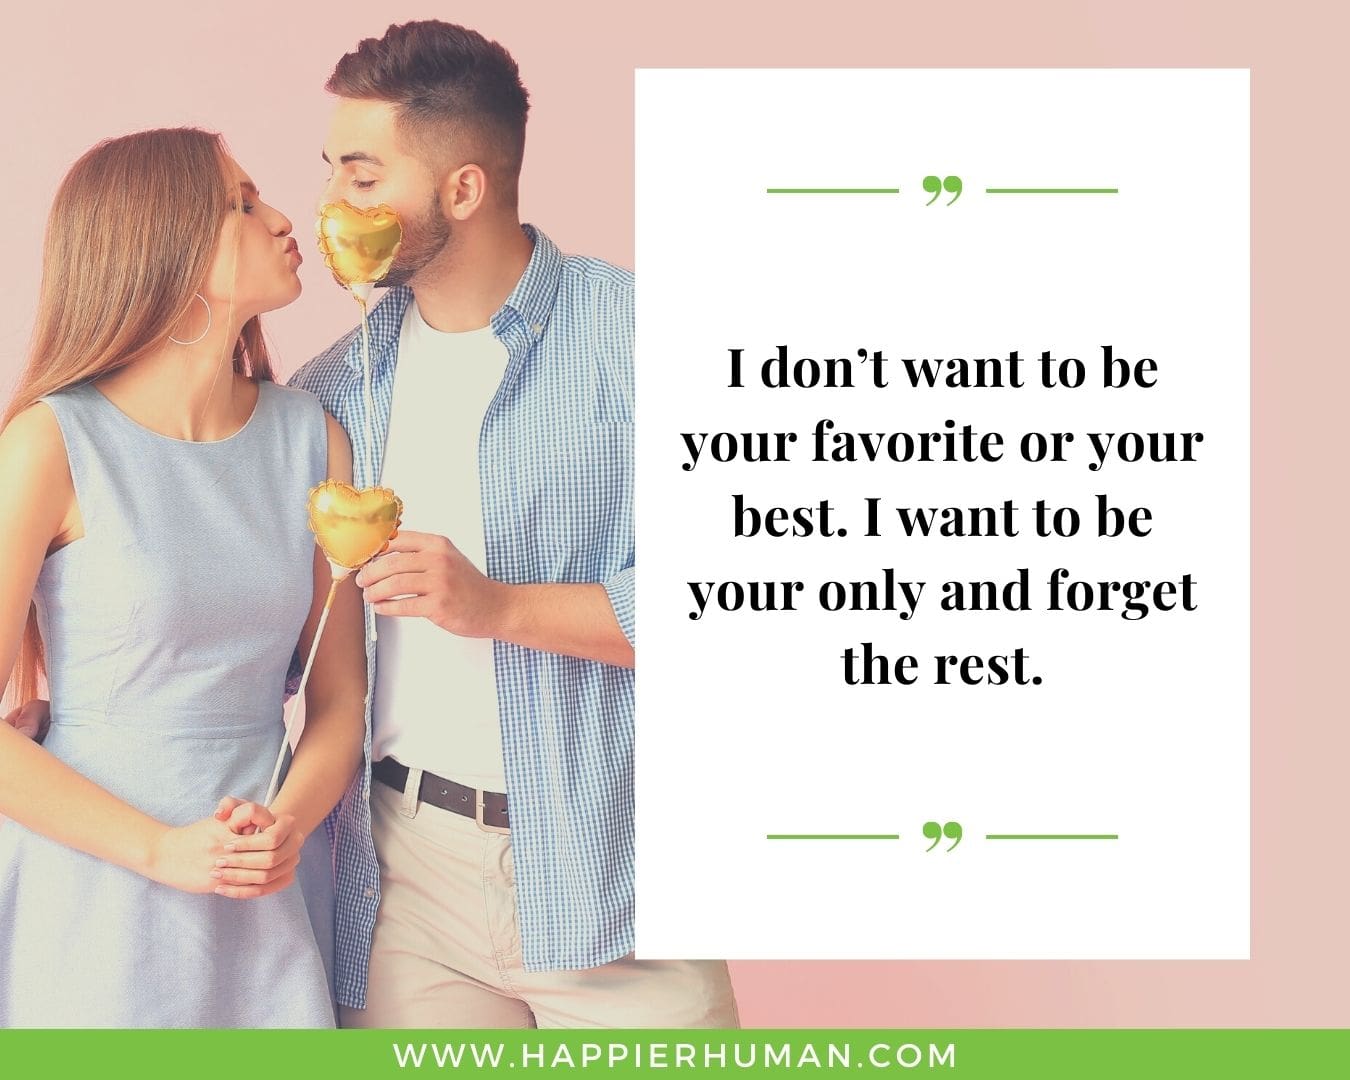 Funny Love Quotes for Her - “I don’t want to be your favorite or your best. I want to be your only and forget the rest.”